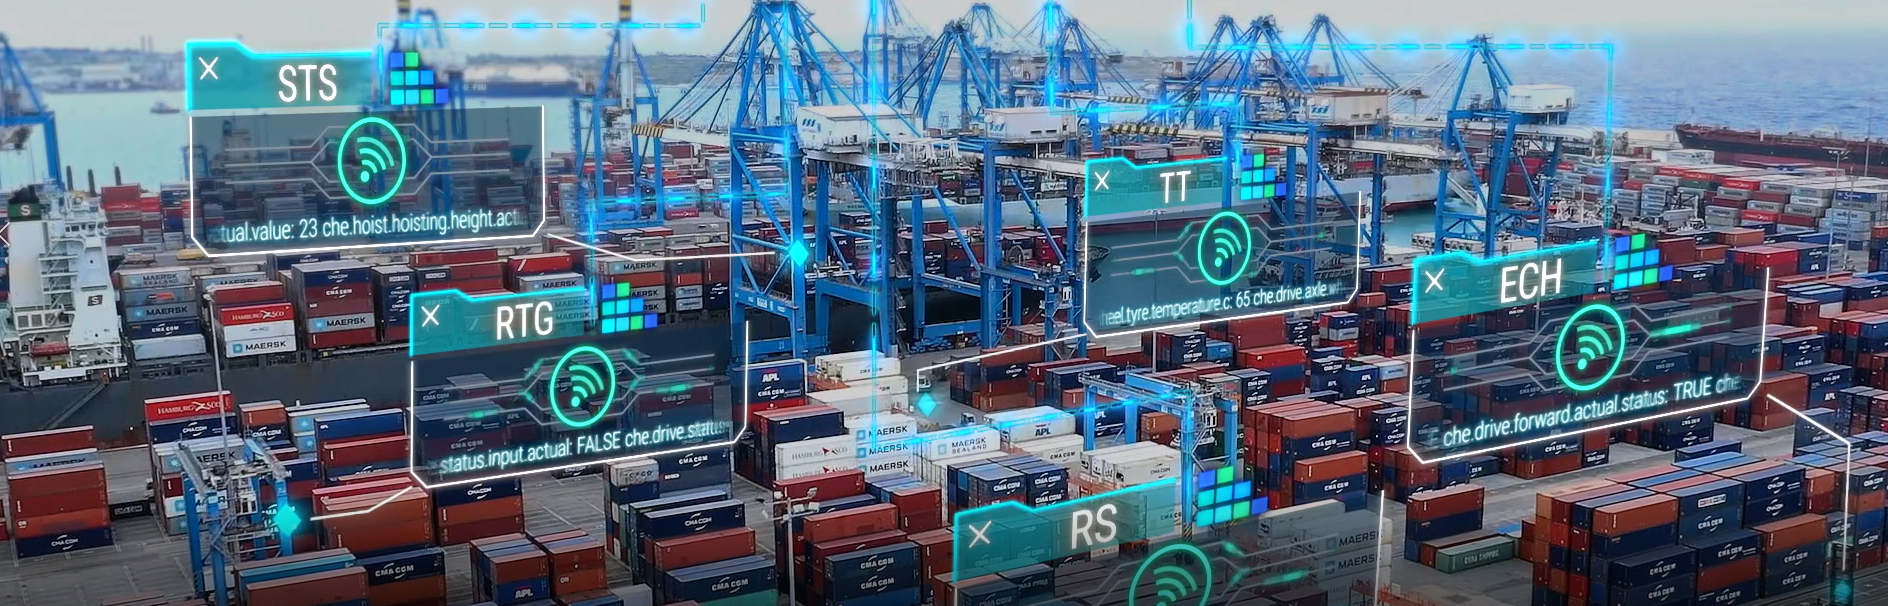 iTerminals project tests standard digital language for container terminals in real operations